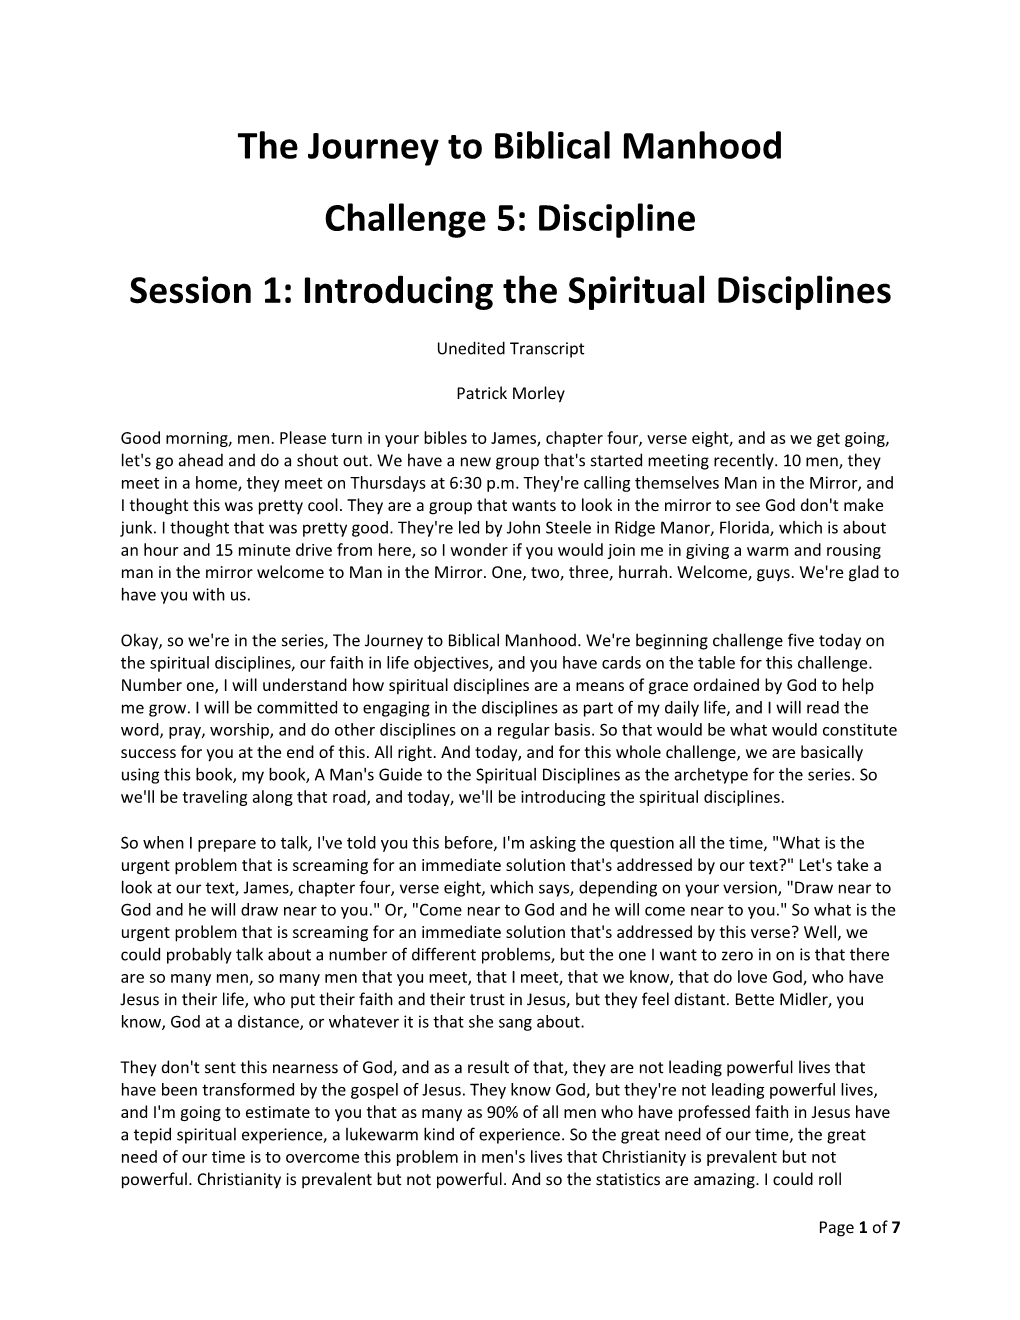 The Journey to Biblical Manhood Challenge 5: Discipline Session 1: Introducing the Spiritual Disciplines